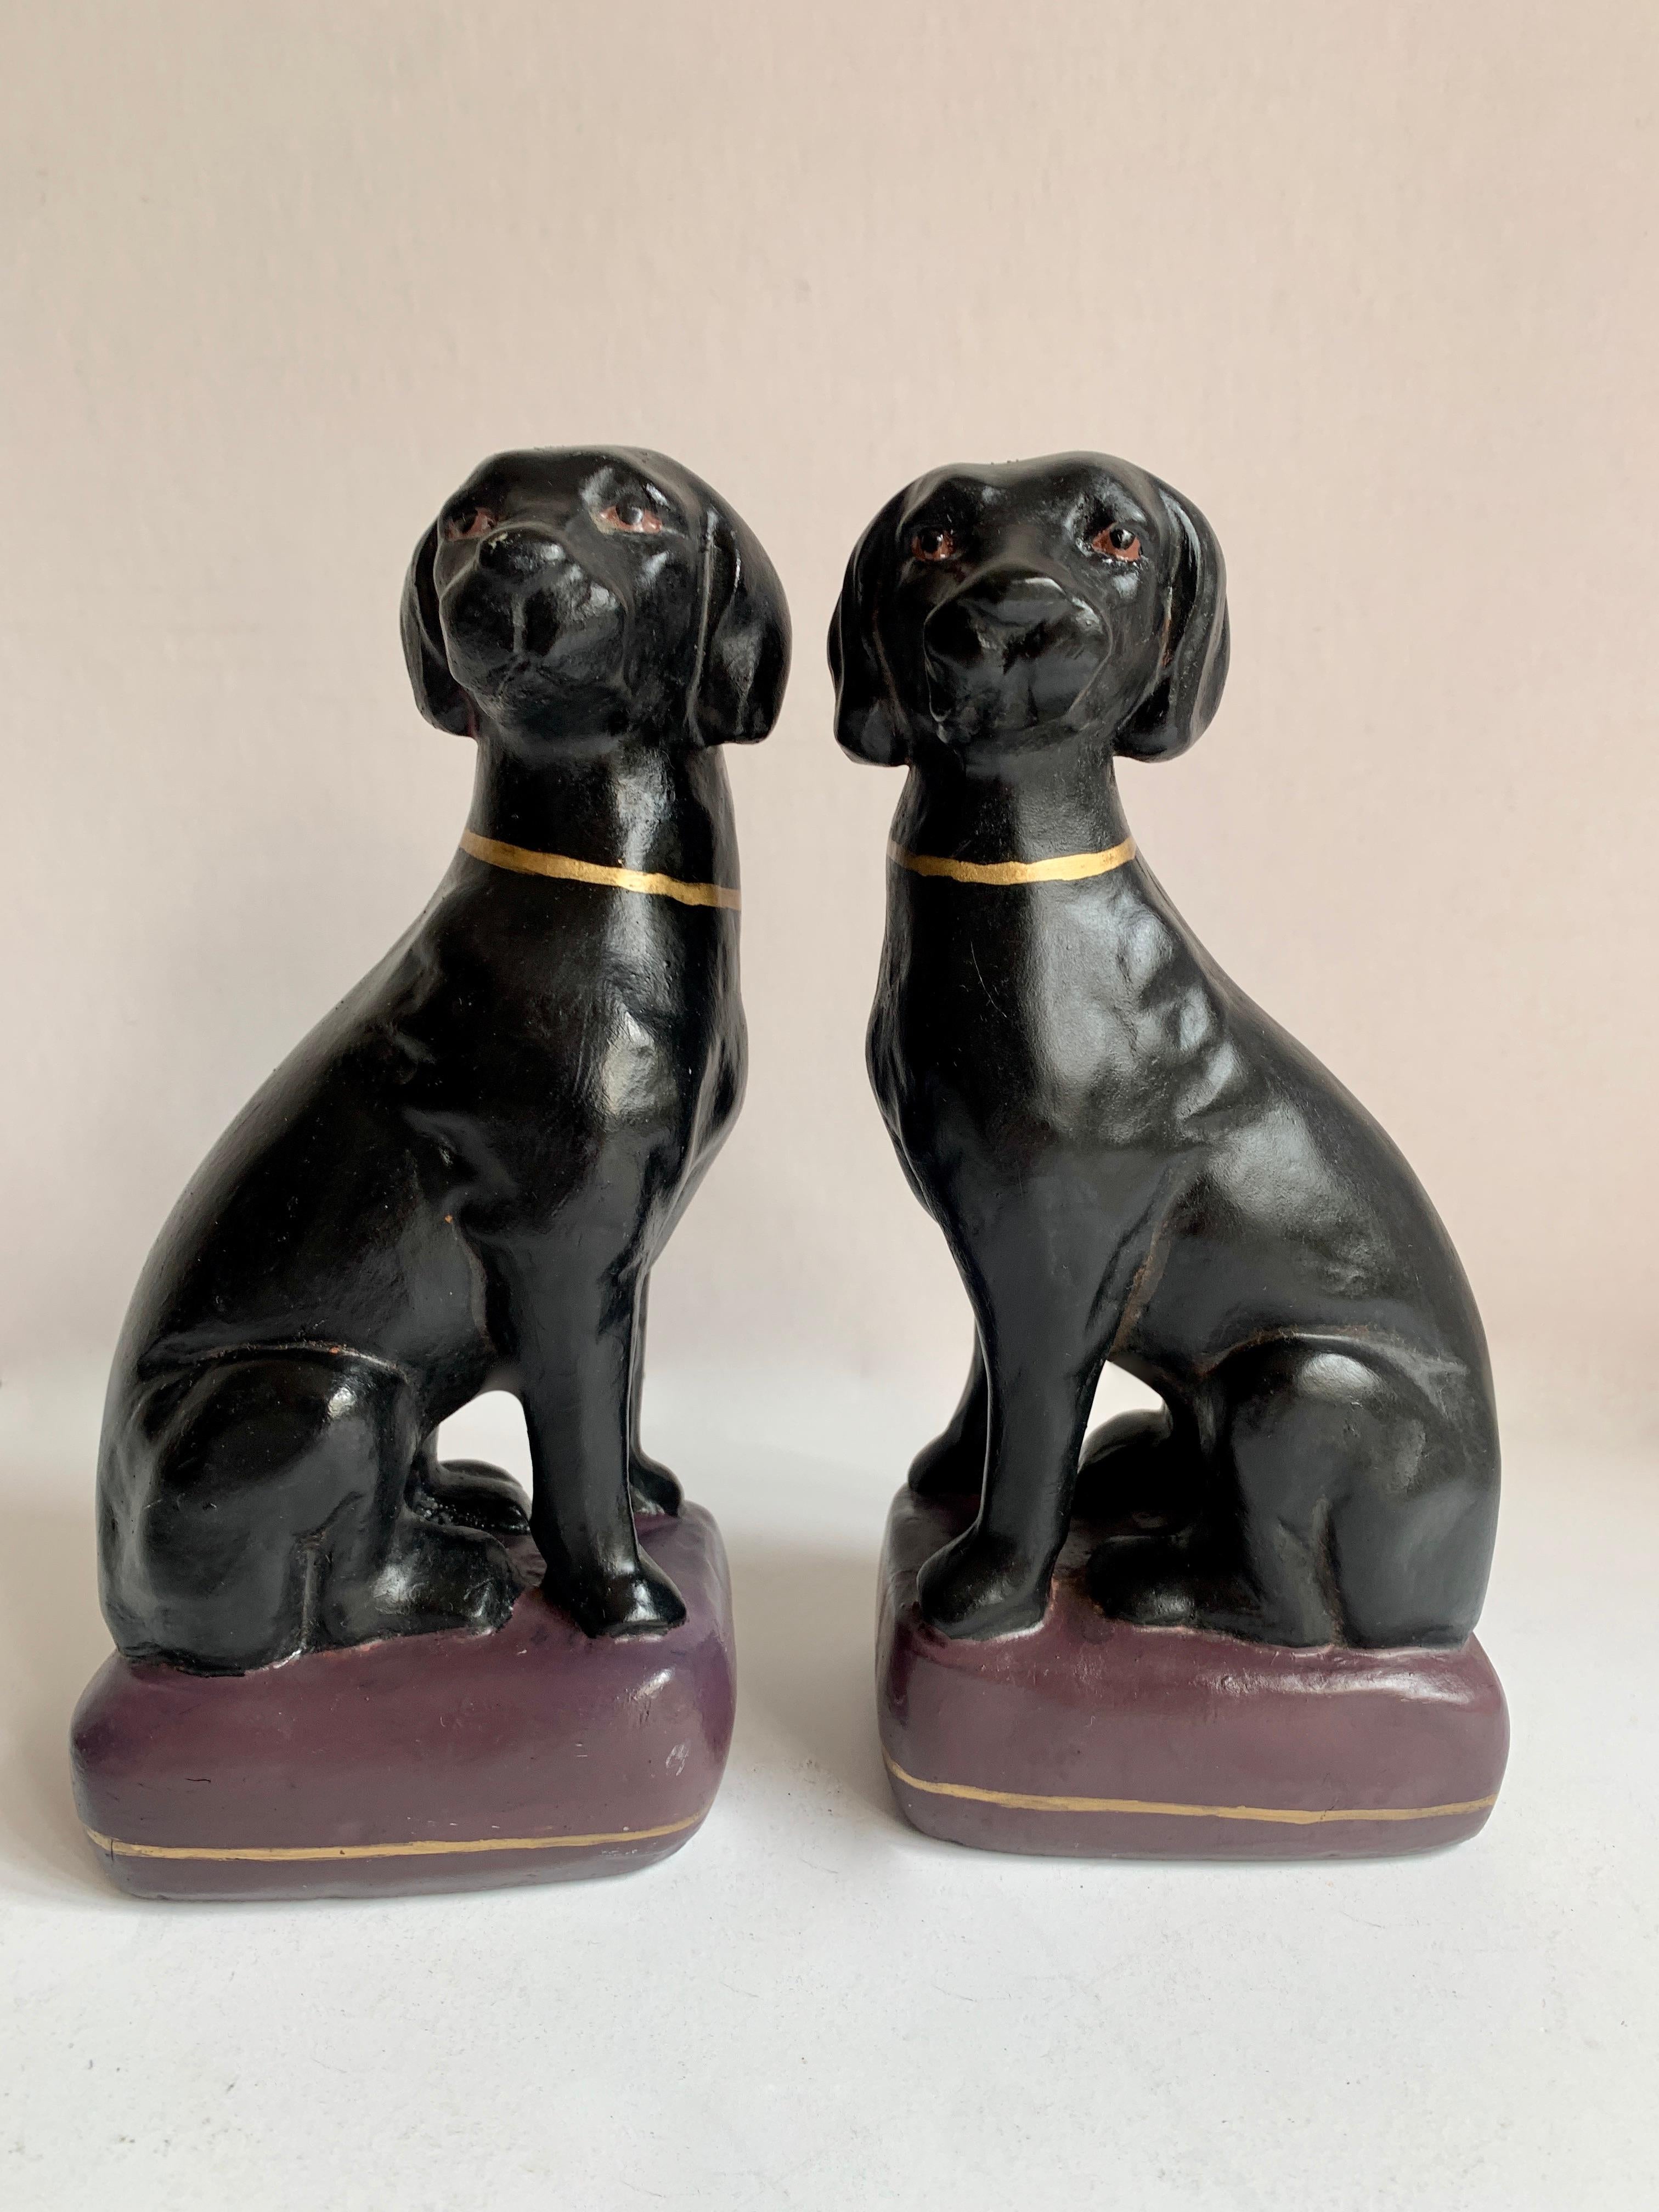 Pair of black Labrador retriever bookends - a wonderful pair of black labs sitting on a gilt purple pillow with a matching gilt collar. The pair will compliment any shelf and hold your favorite books. Also, a nice addition to the childs room!